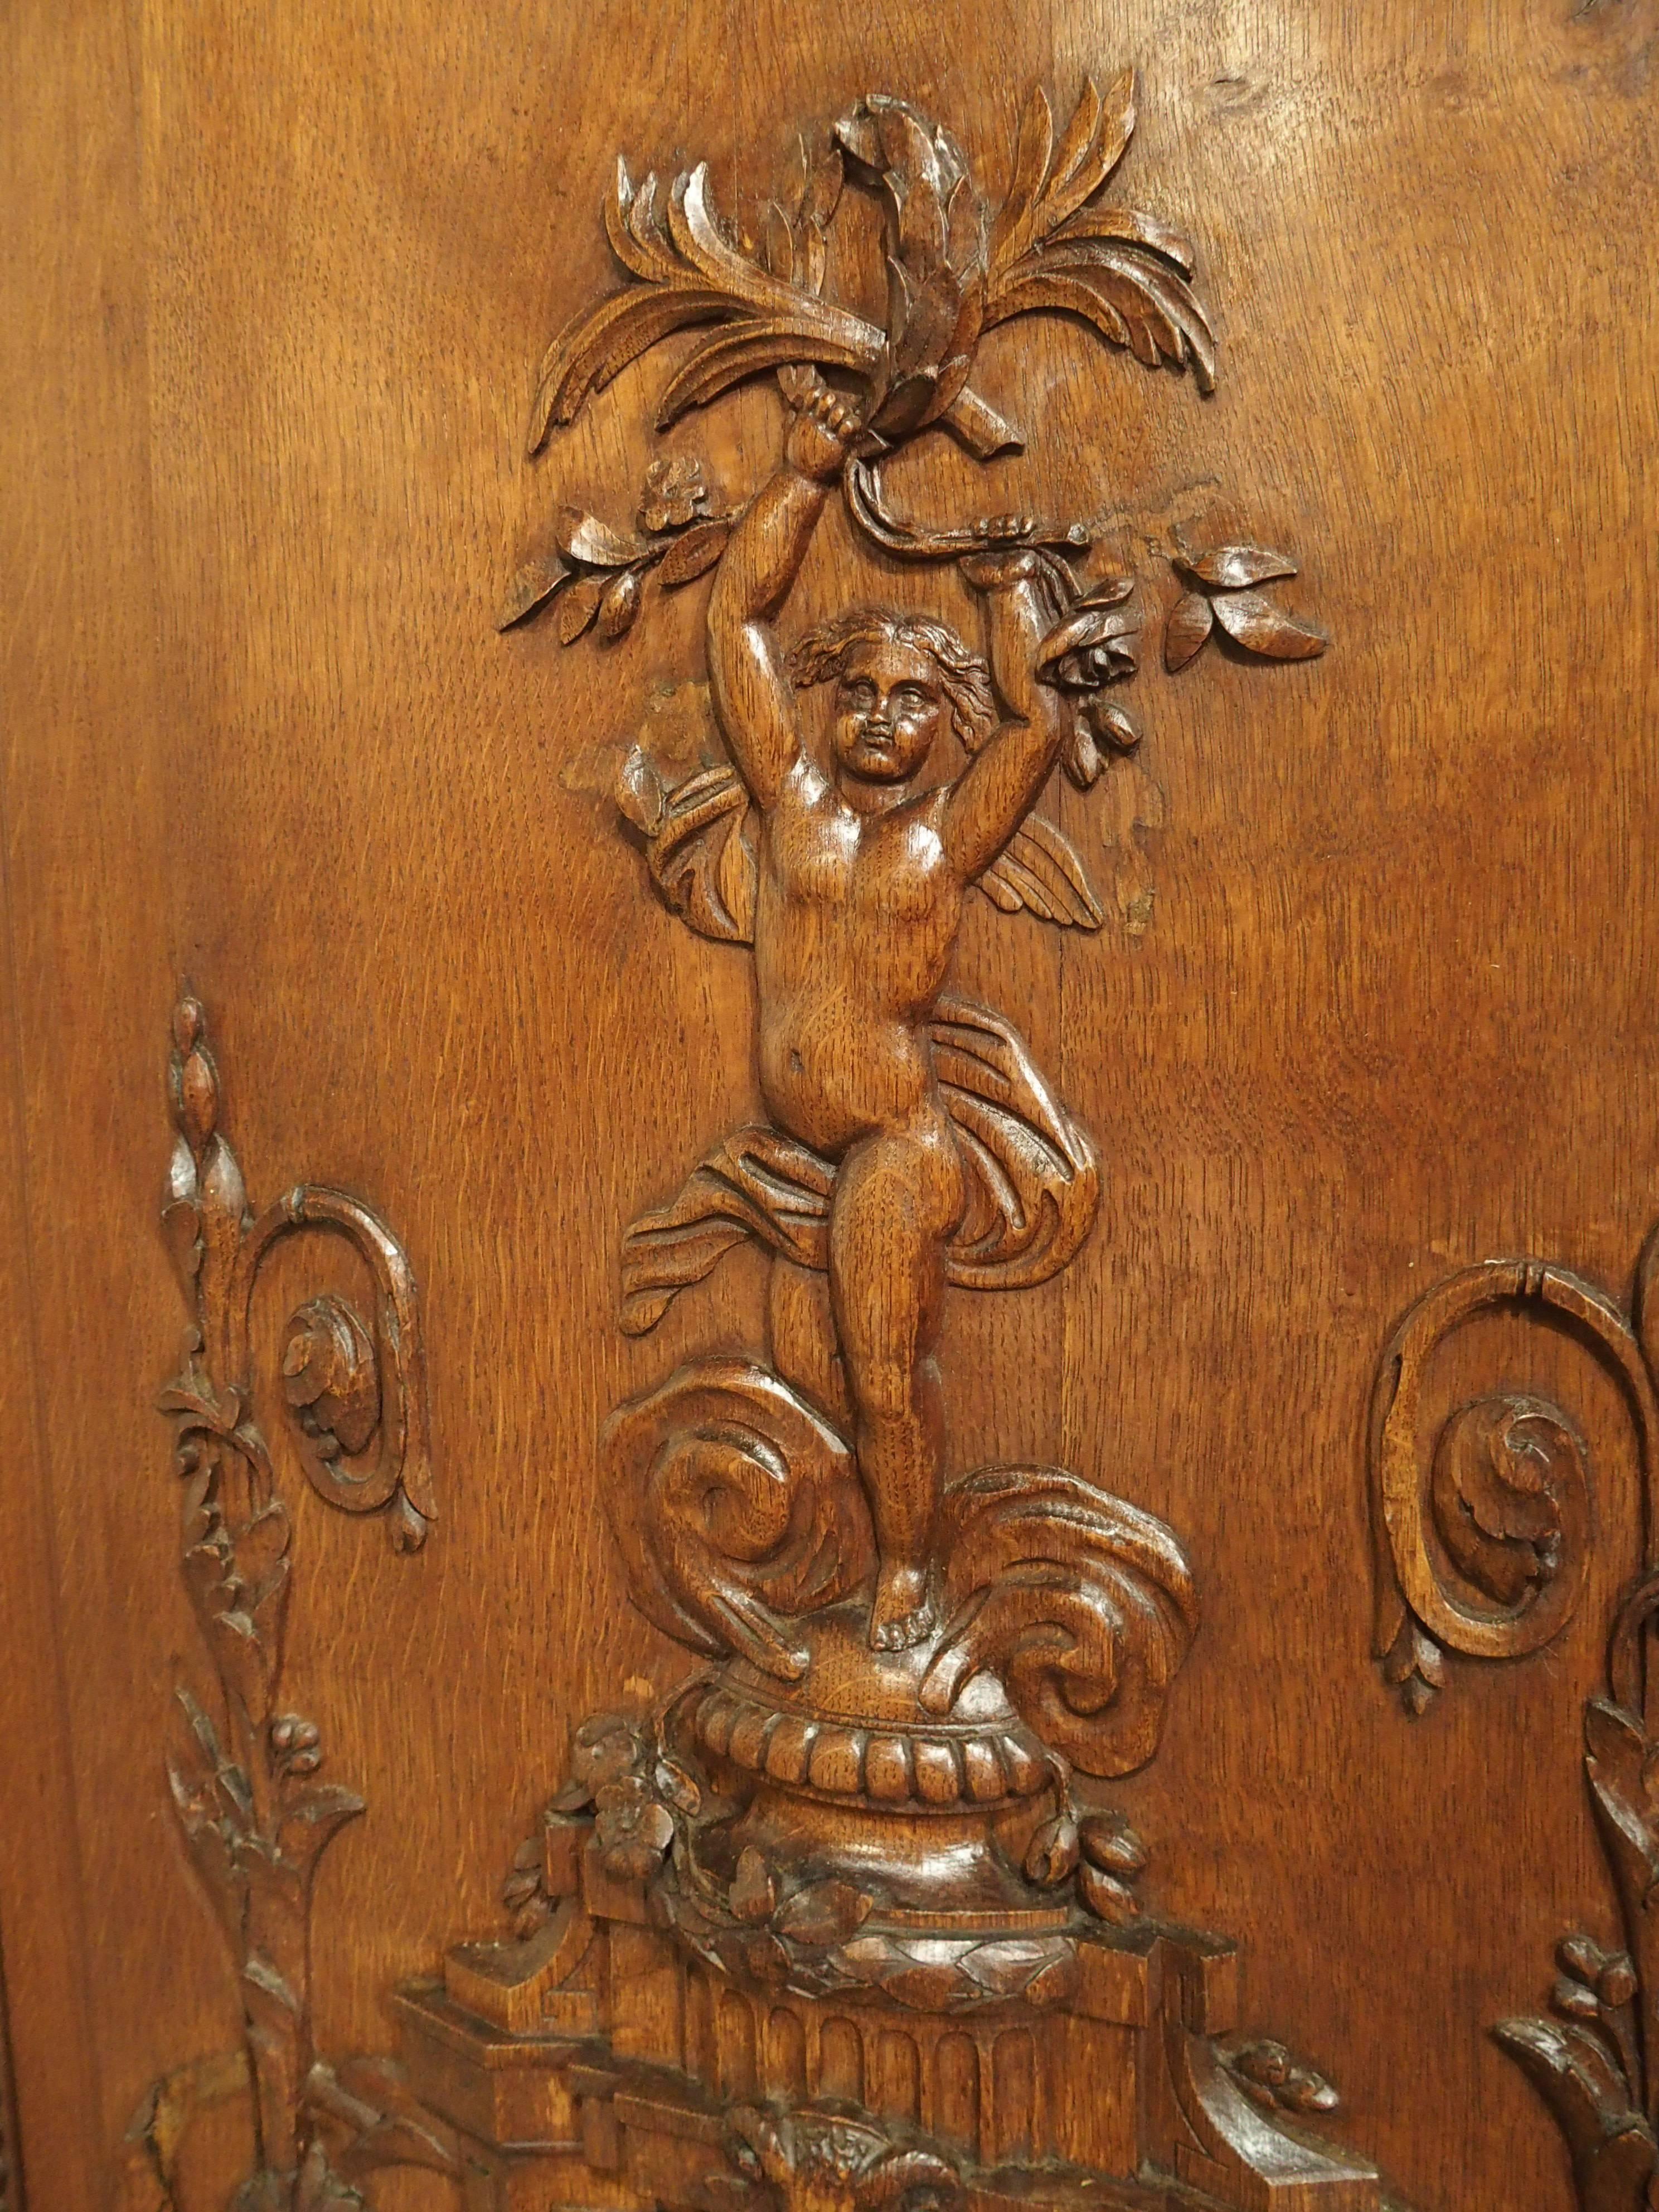 These stunning 19th century French wooden panels came from a boiserie or wooden paneled room. They were most recently salvaged from a chateau north of Paris, and are constructed of French oak. All 3 panels have motifs of musical trophies at the top